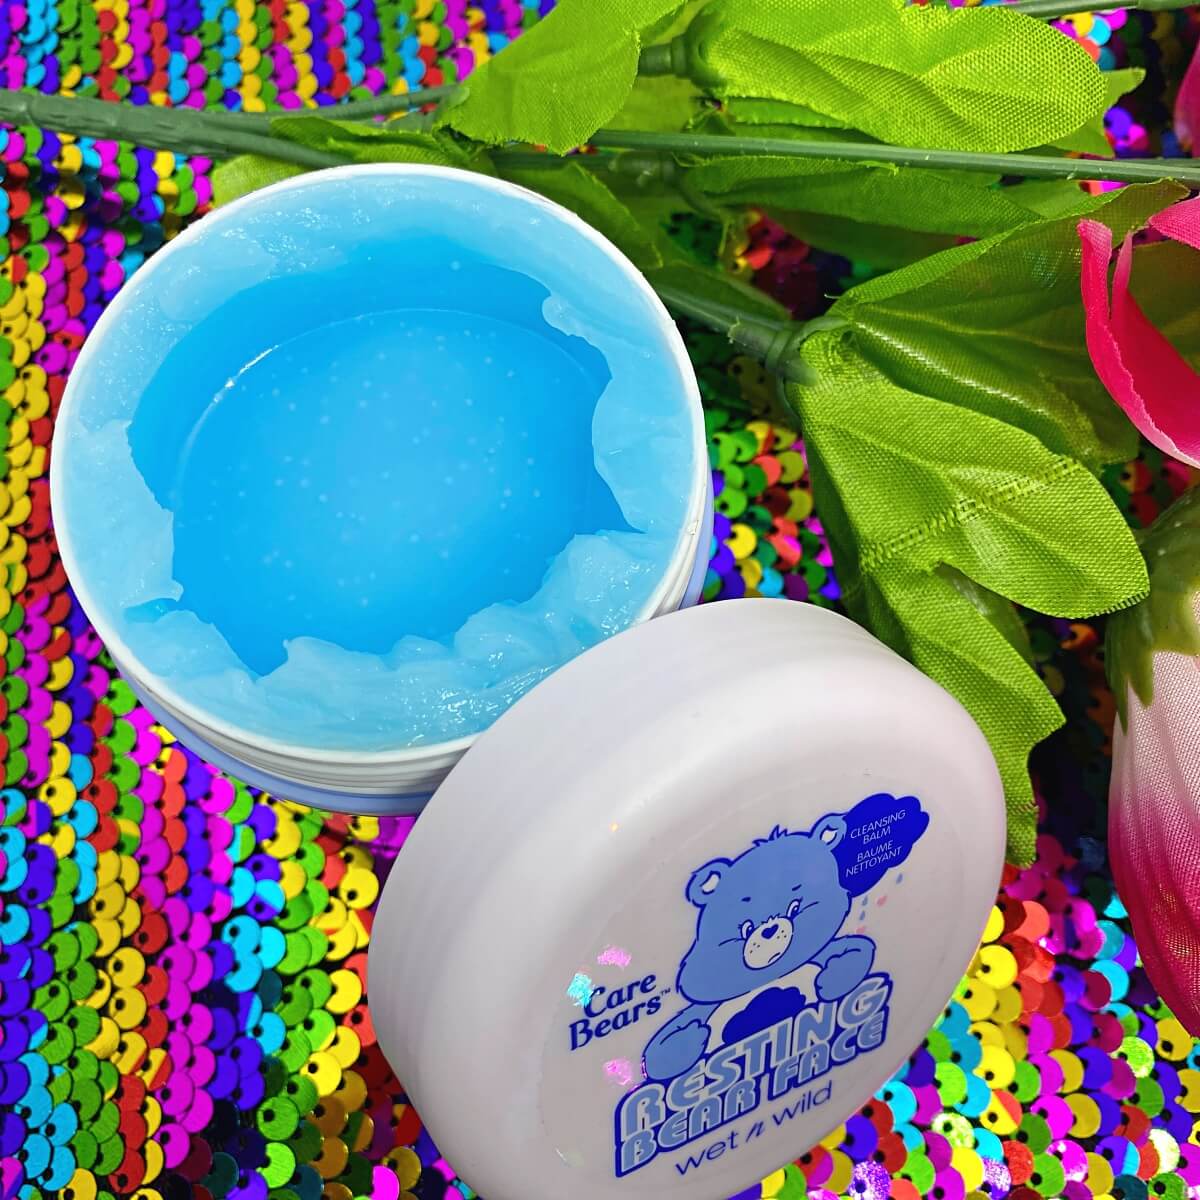 wet n wild Care Bears Resting Bear Face Cleansing Balm